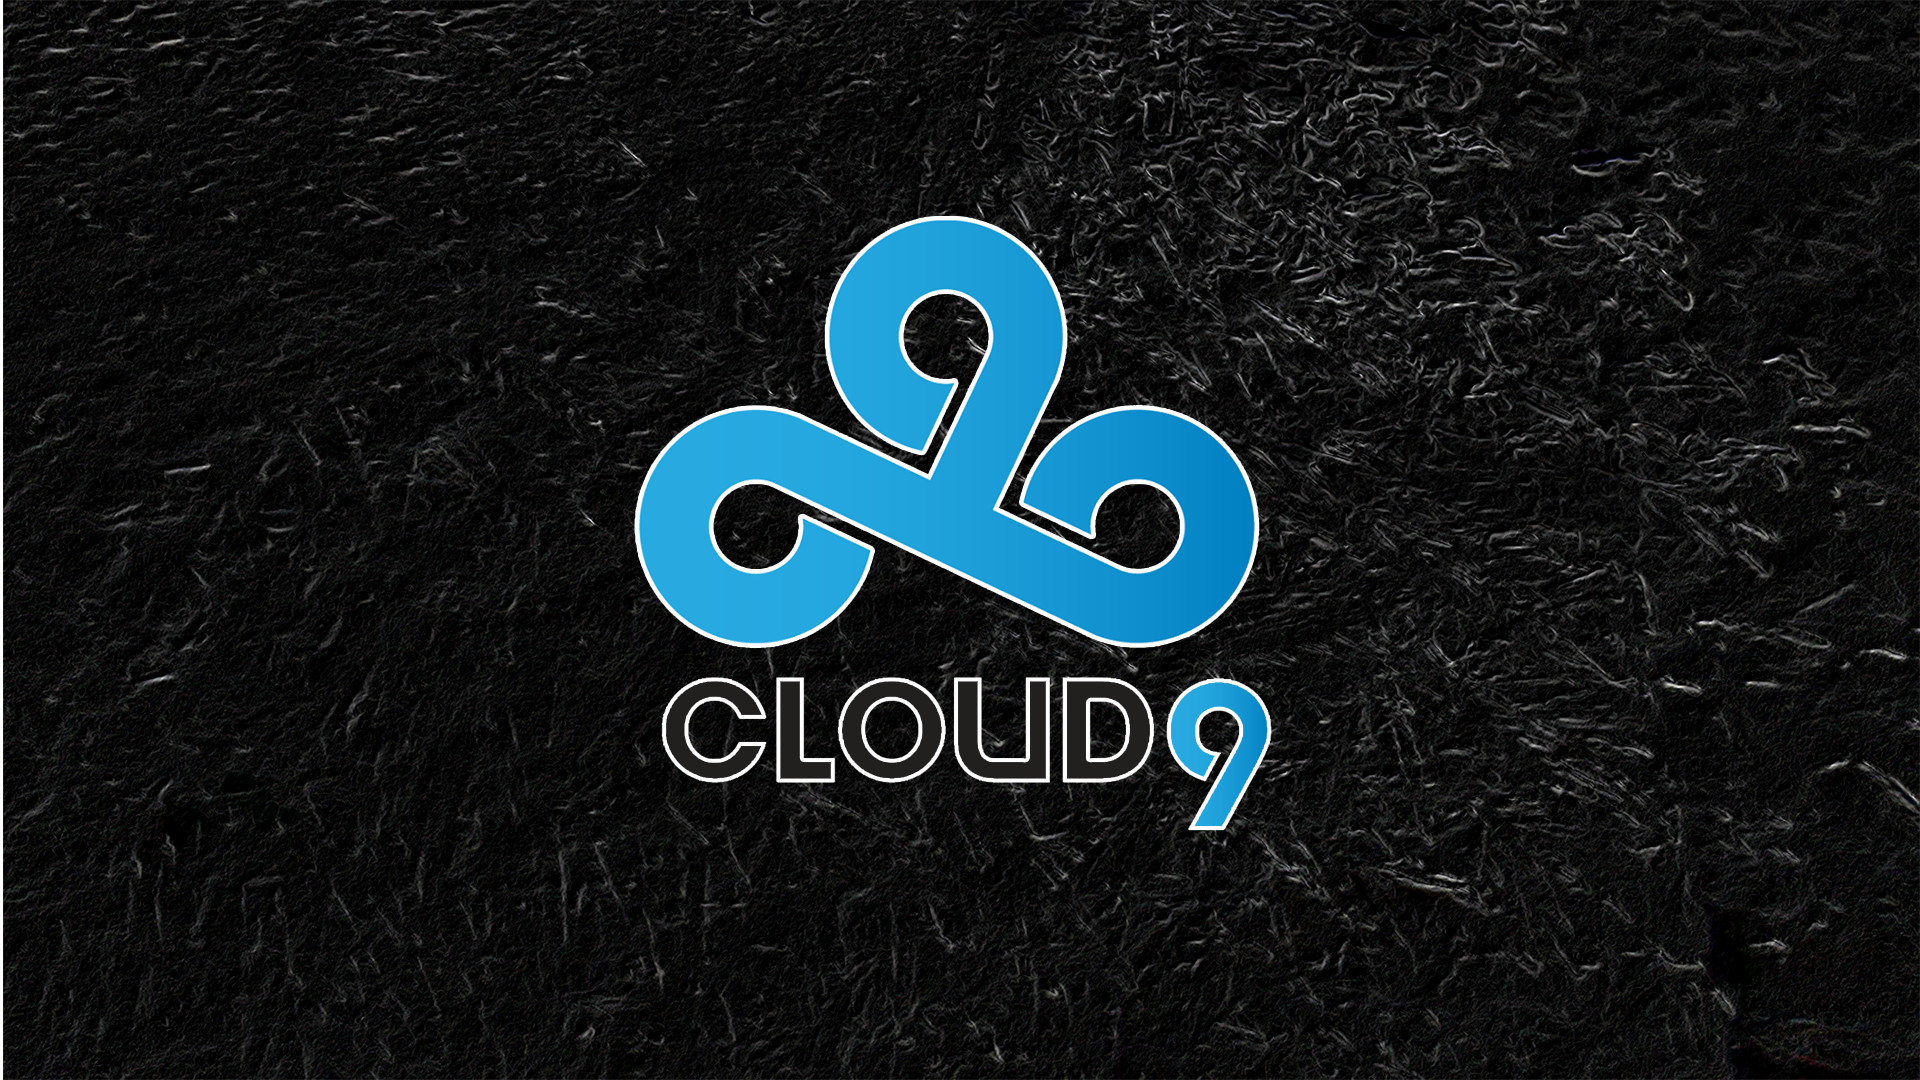 1920x1080 ... Cloud9 CS:GO and LoL Wallpaper HD by toskevdesing